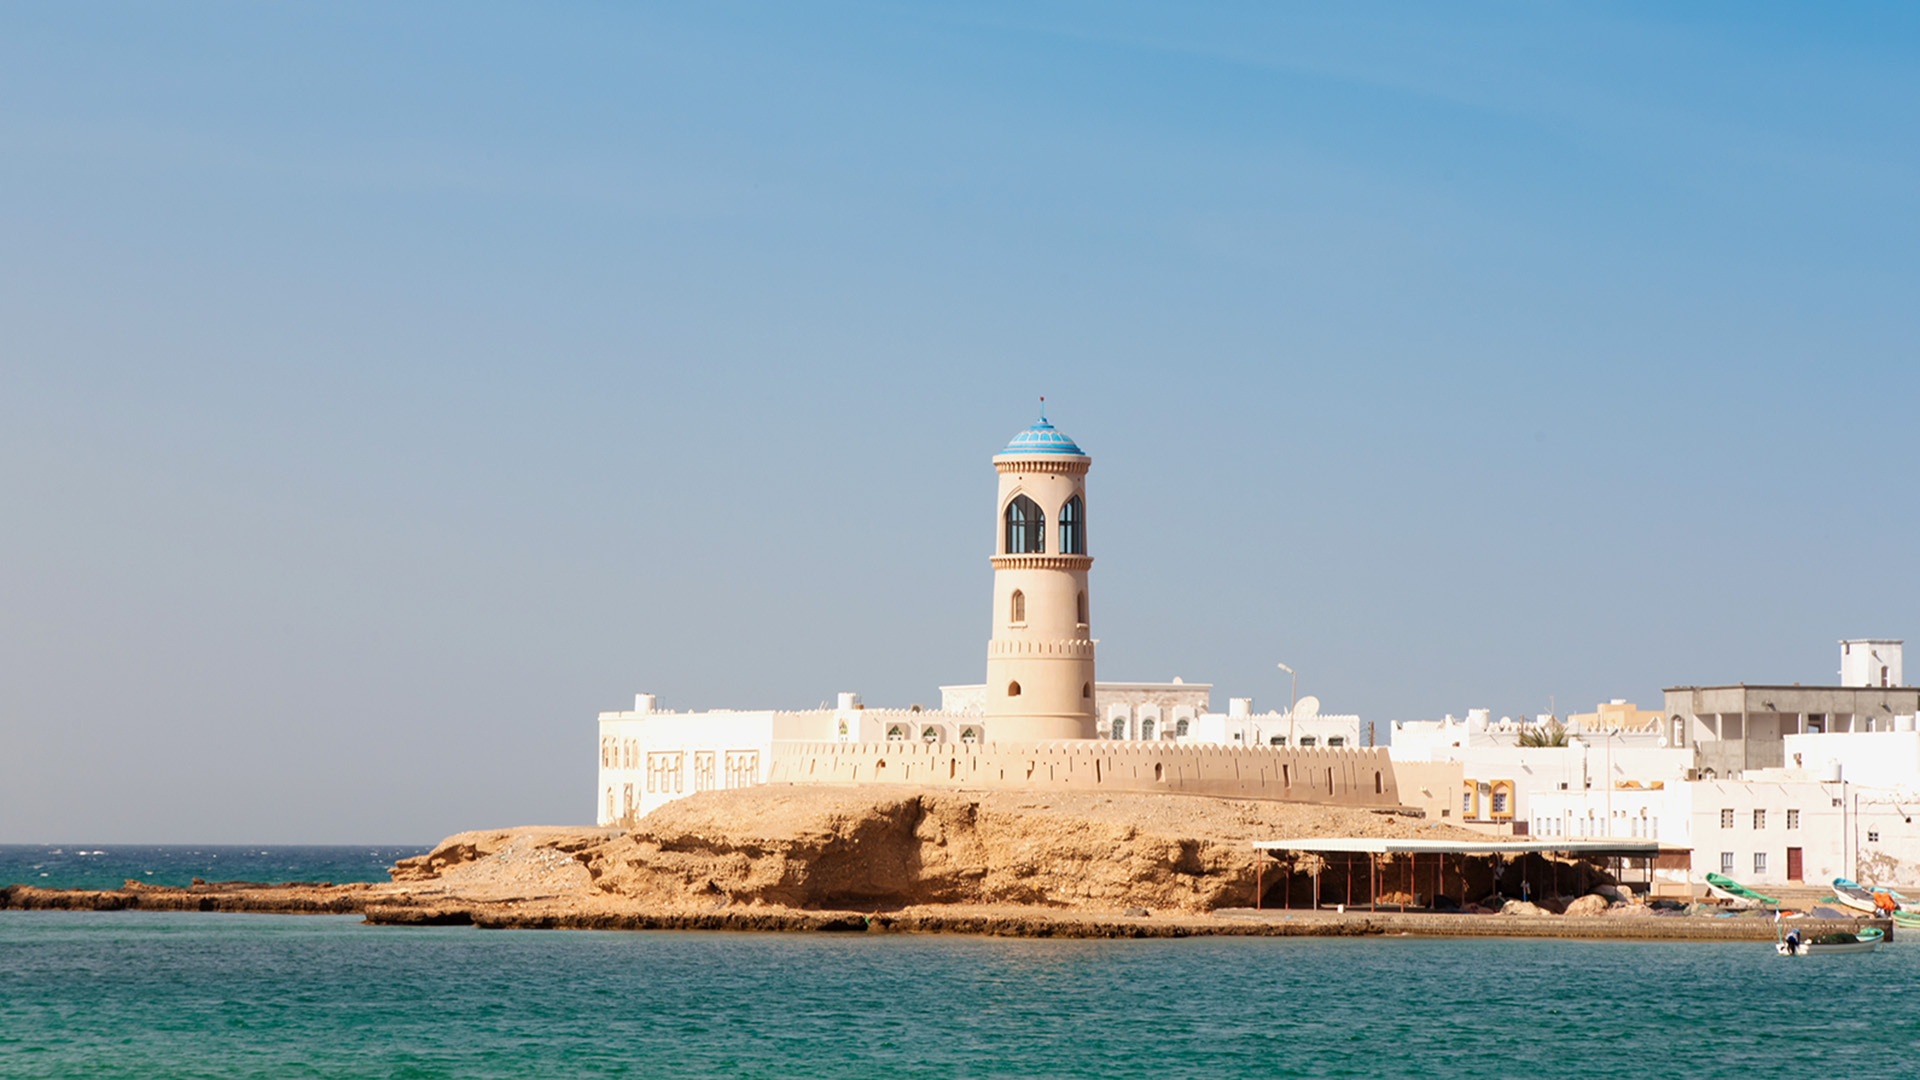 Lighthouse by the sea in Sur, Oman.